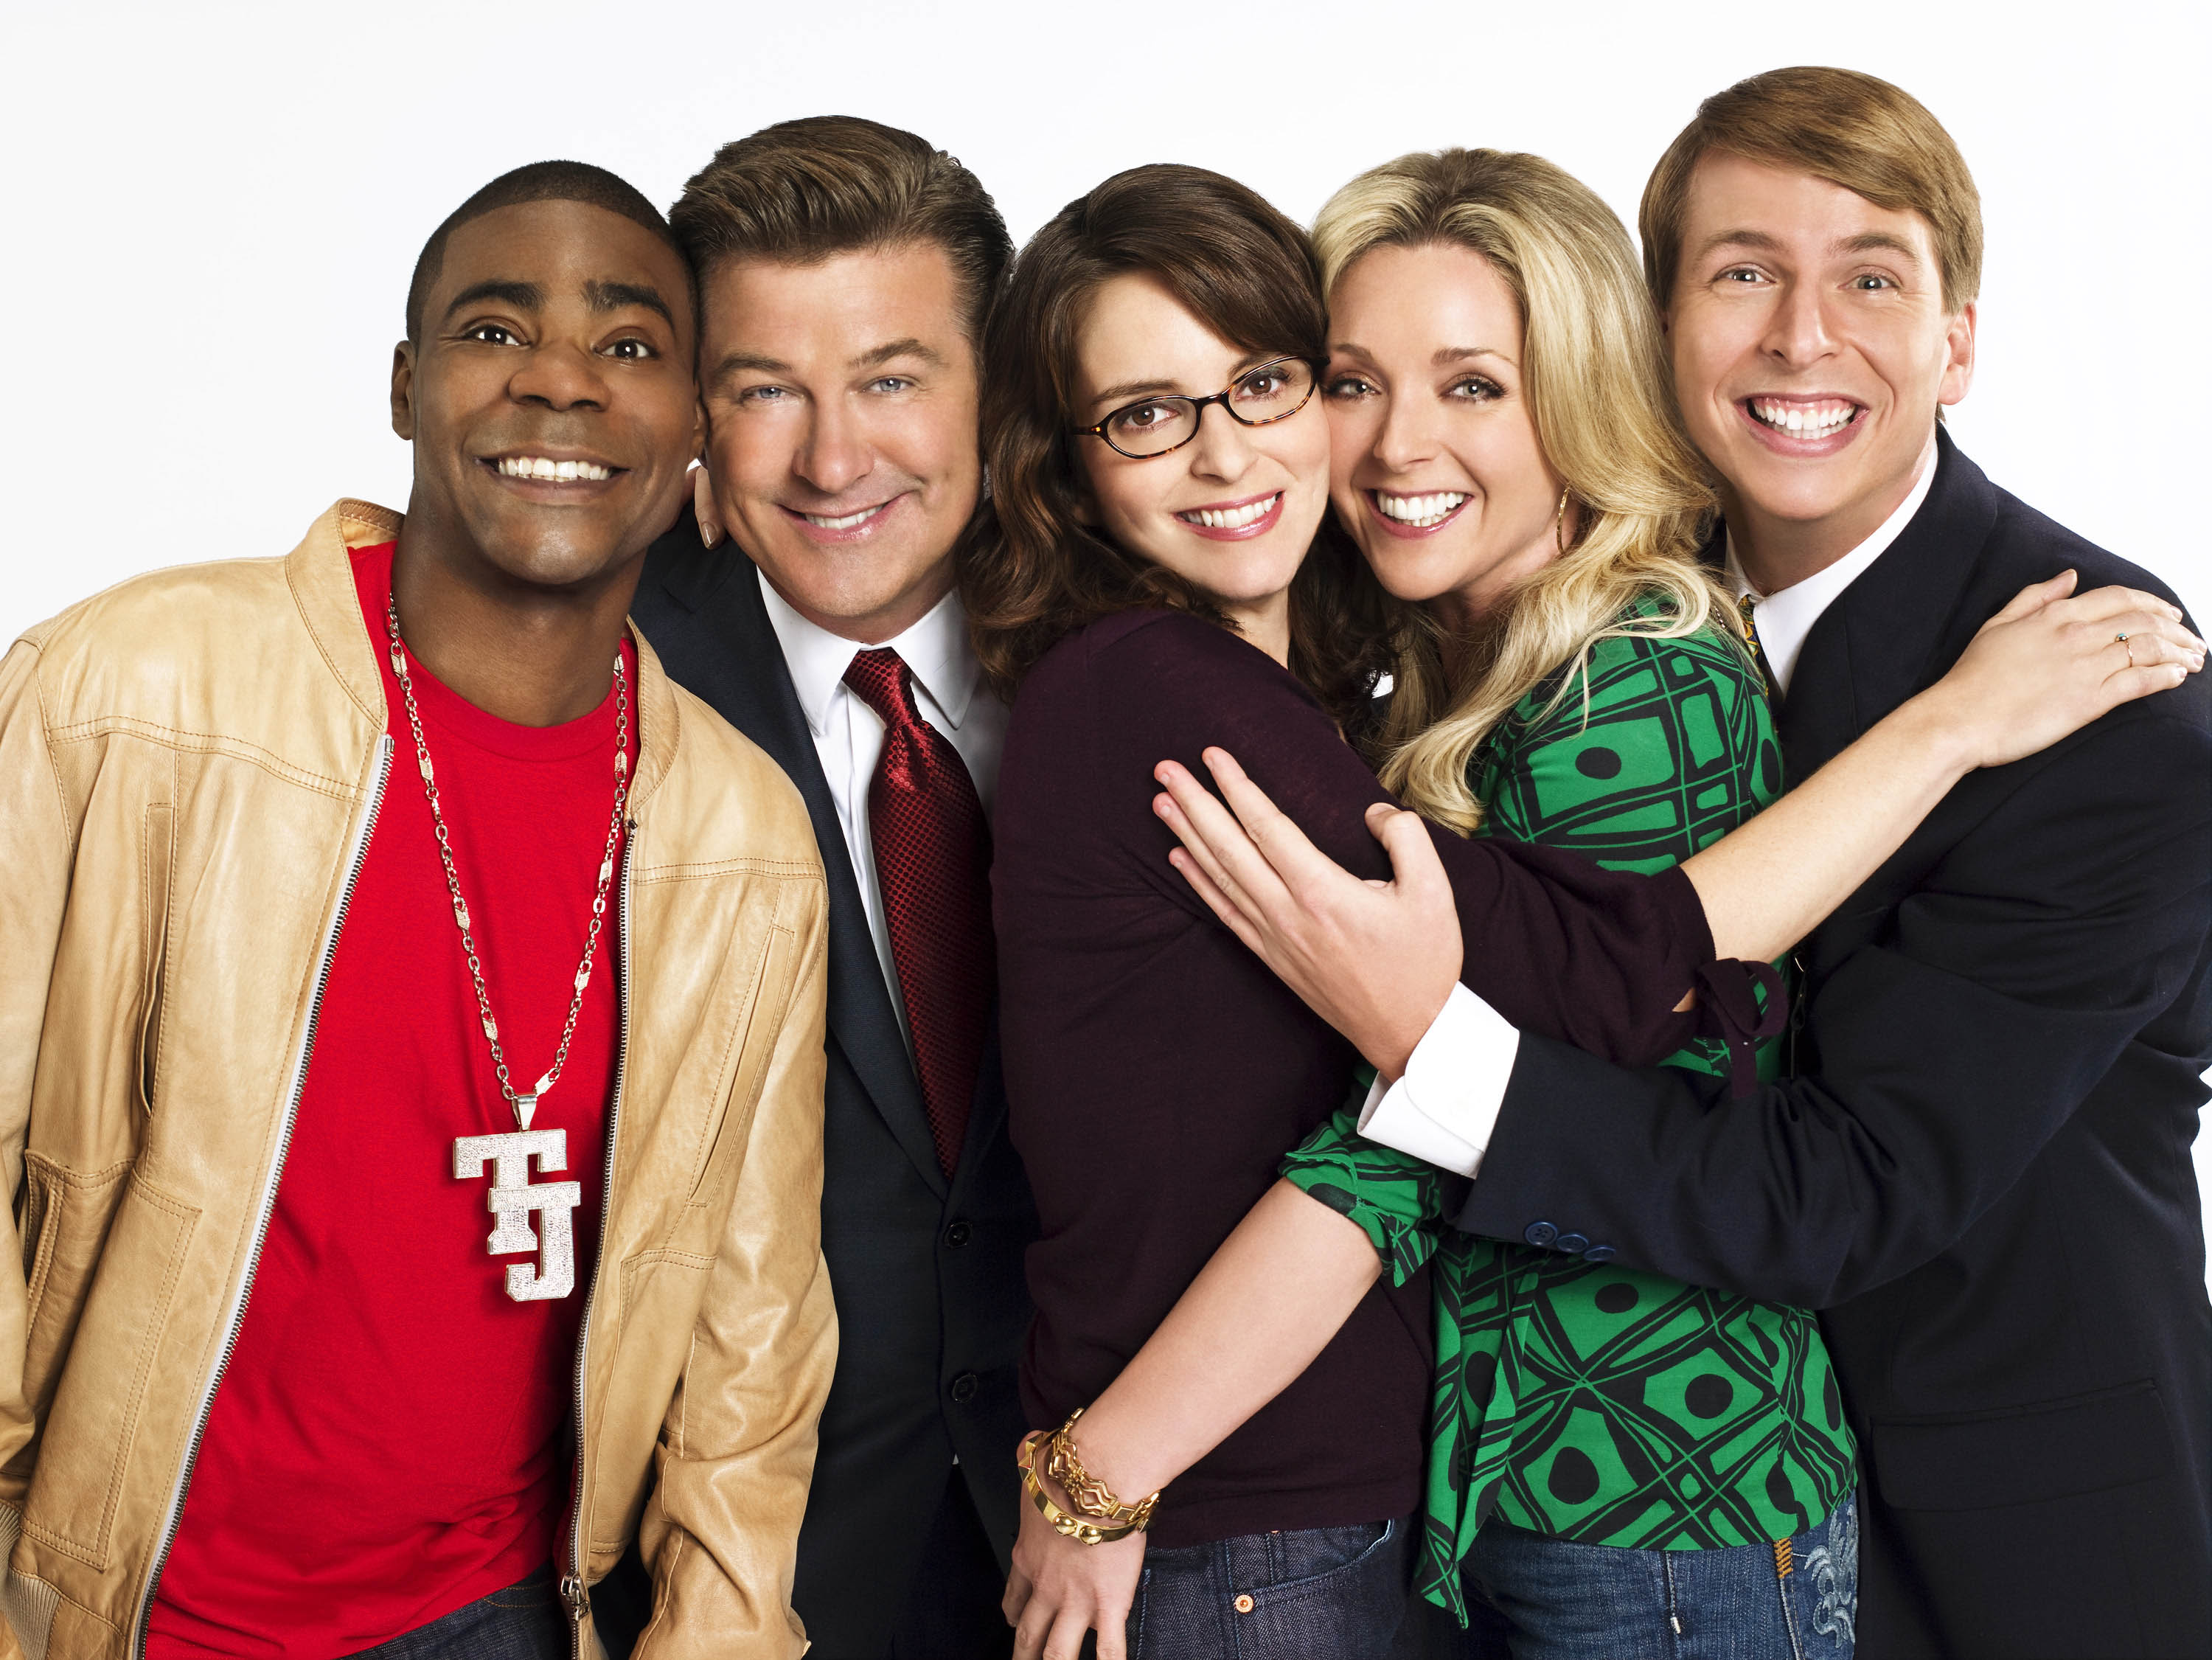 "30 Rock," which stars, from left, Tracy Morgan, Alec Baldwin, Tina Fey, Jane Krakowski and Jack McBrayer, took home Emmys this year for best comedy, writing (Fey) and acting (Fey and Baldwin). (NBC/MCT)